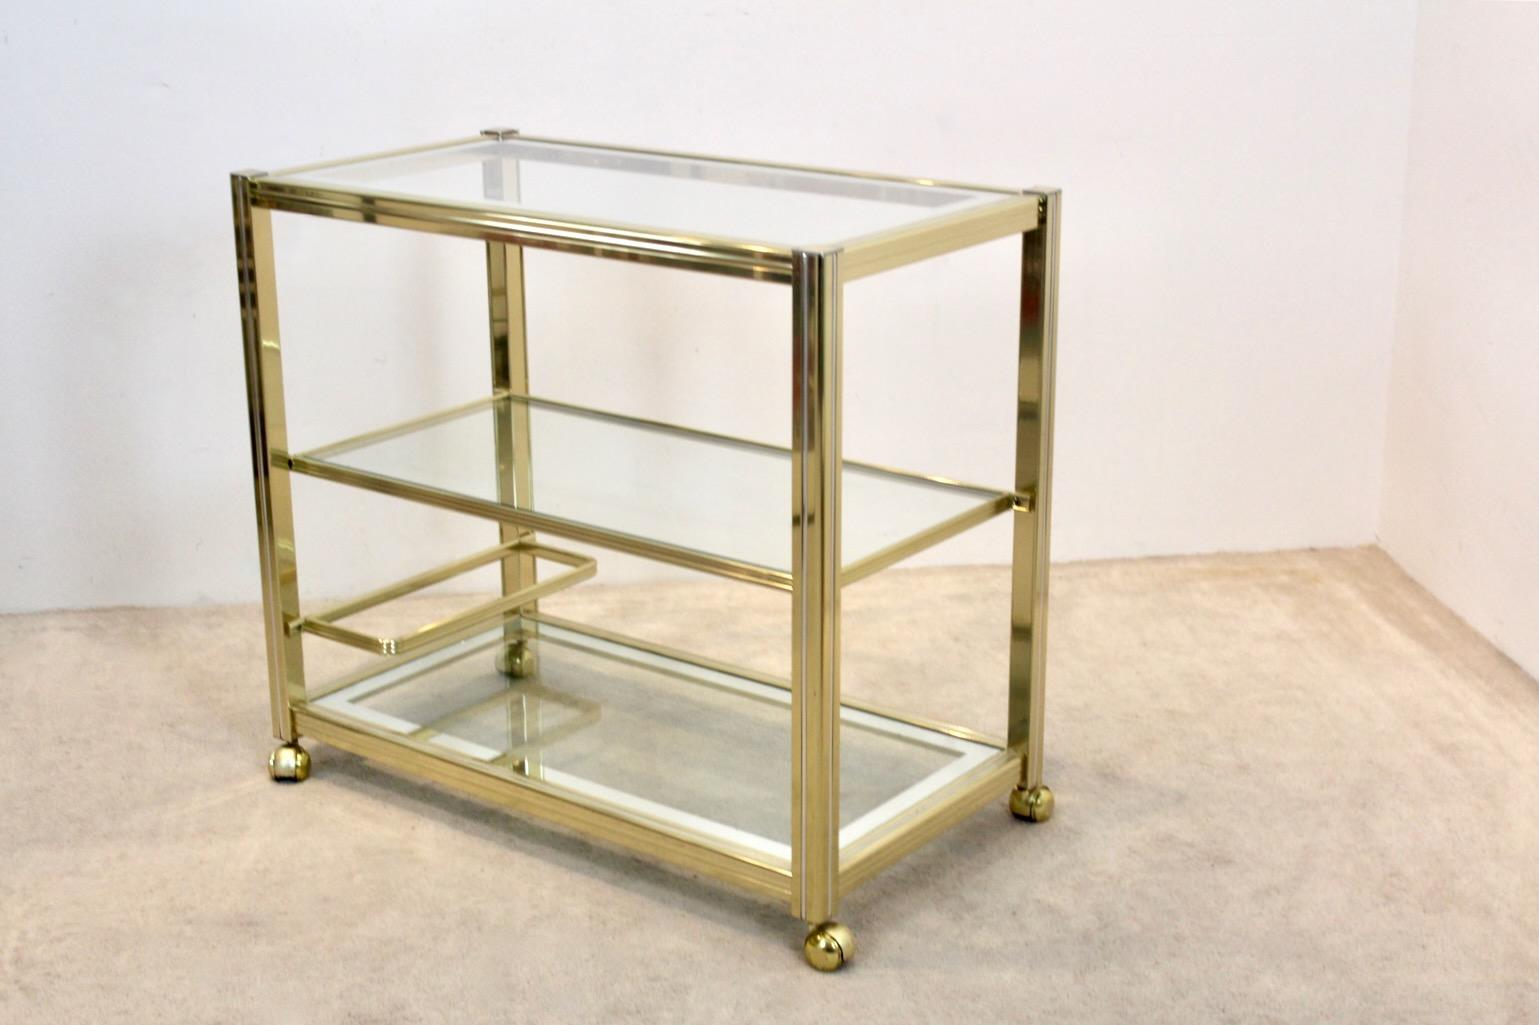 Extraordinary Pierre Vandel Brass and Chrome Bar Cart, France 1970s For Sale 7